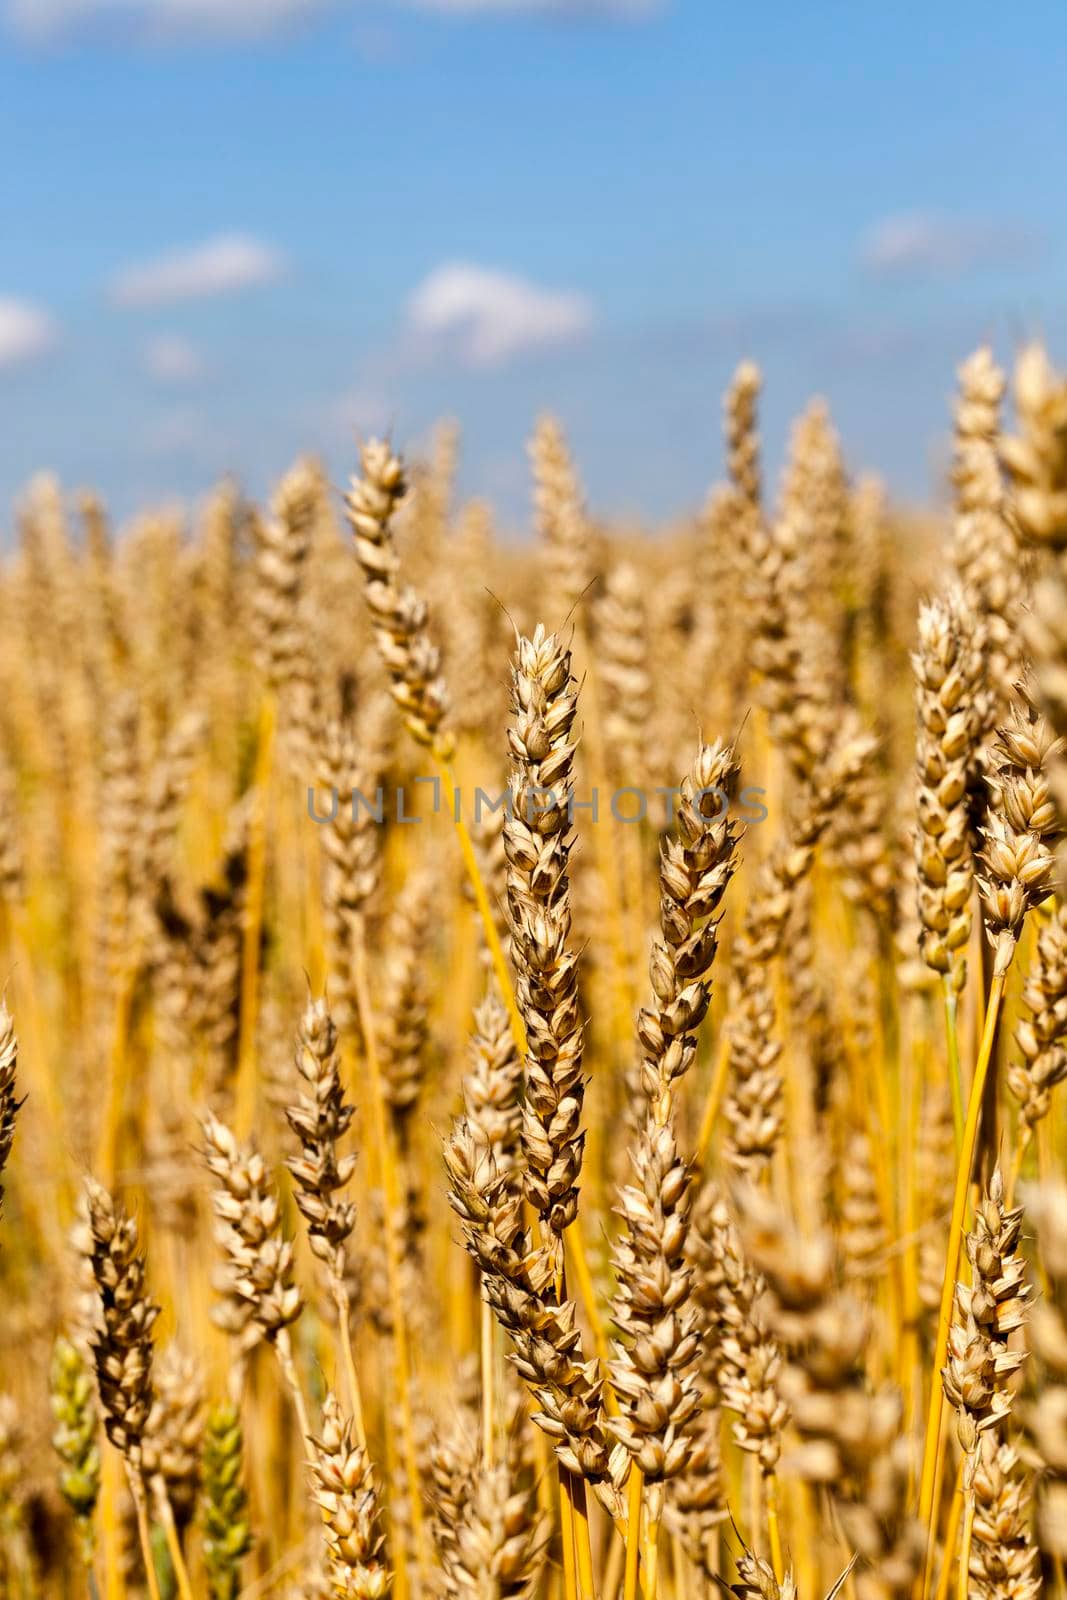 ripe large grain in wheat ears ready for harvest, but before harvest, close-up photo in summer